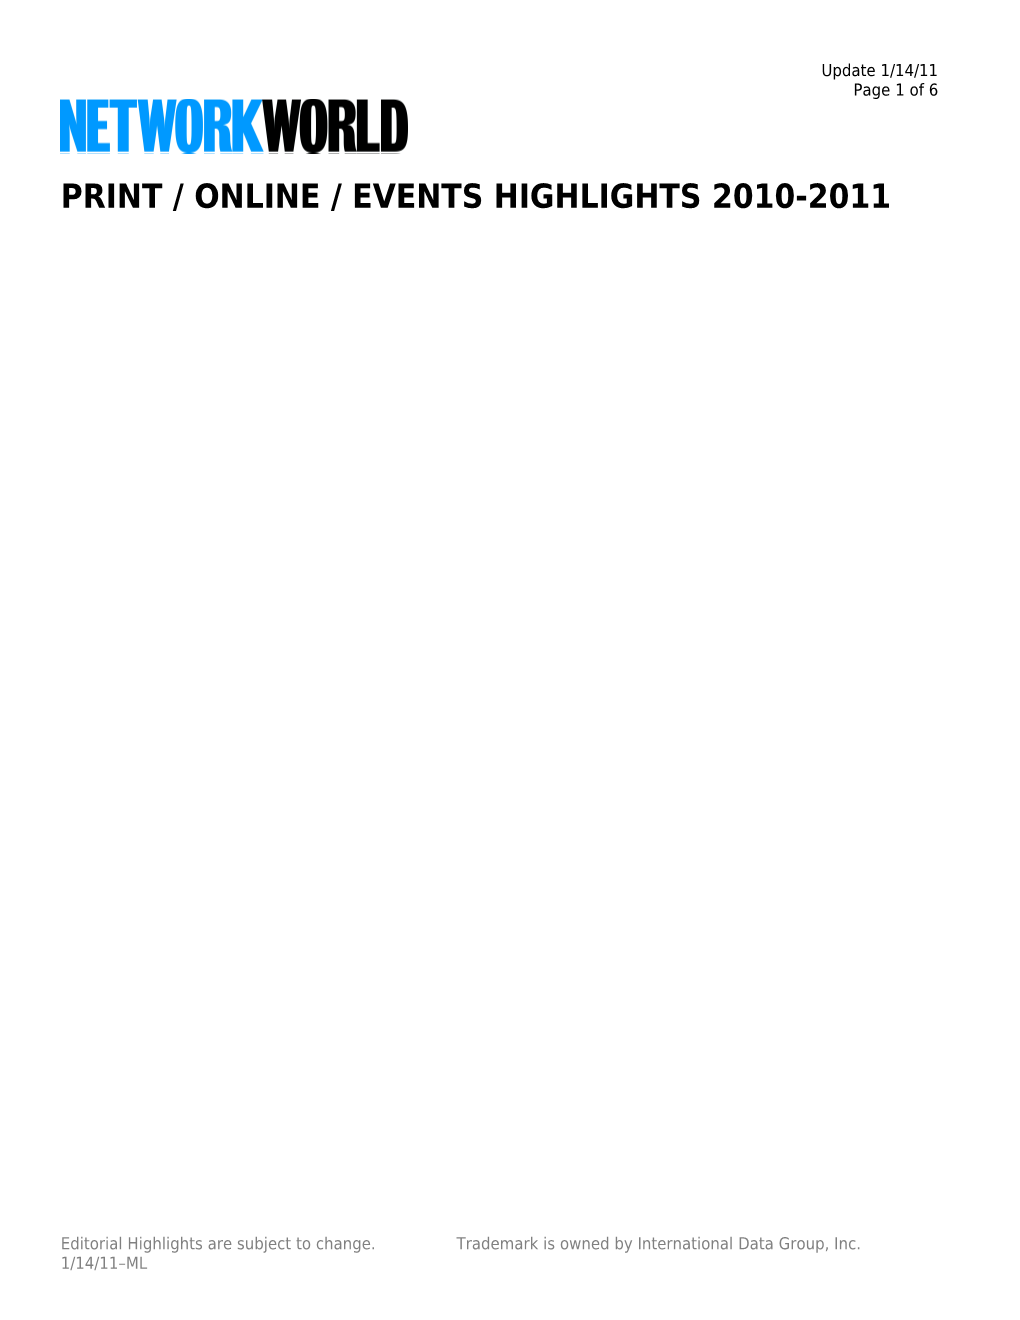 Print/Online/Events Highlights 2000